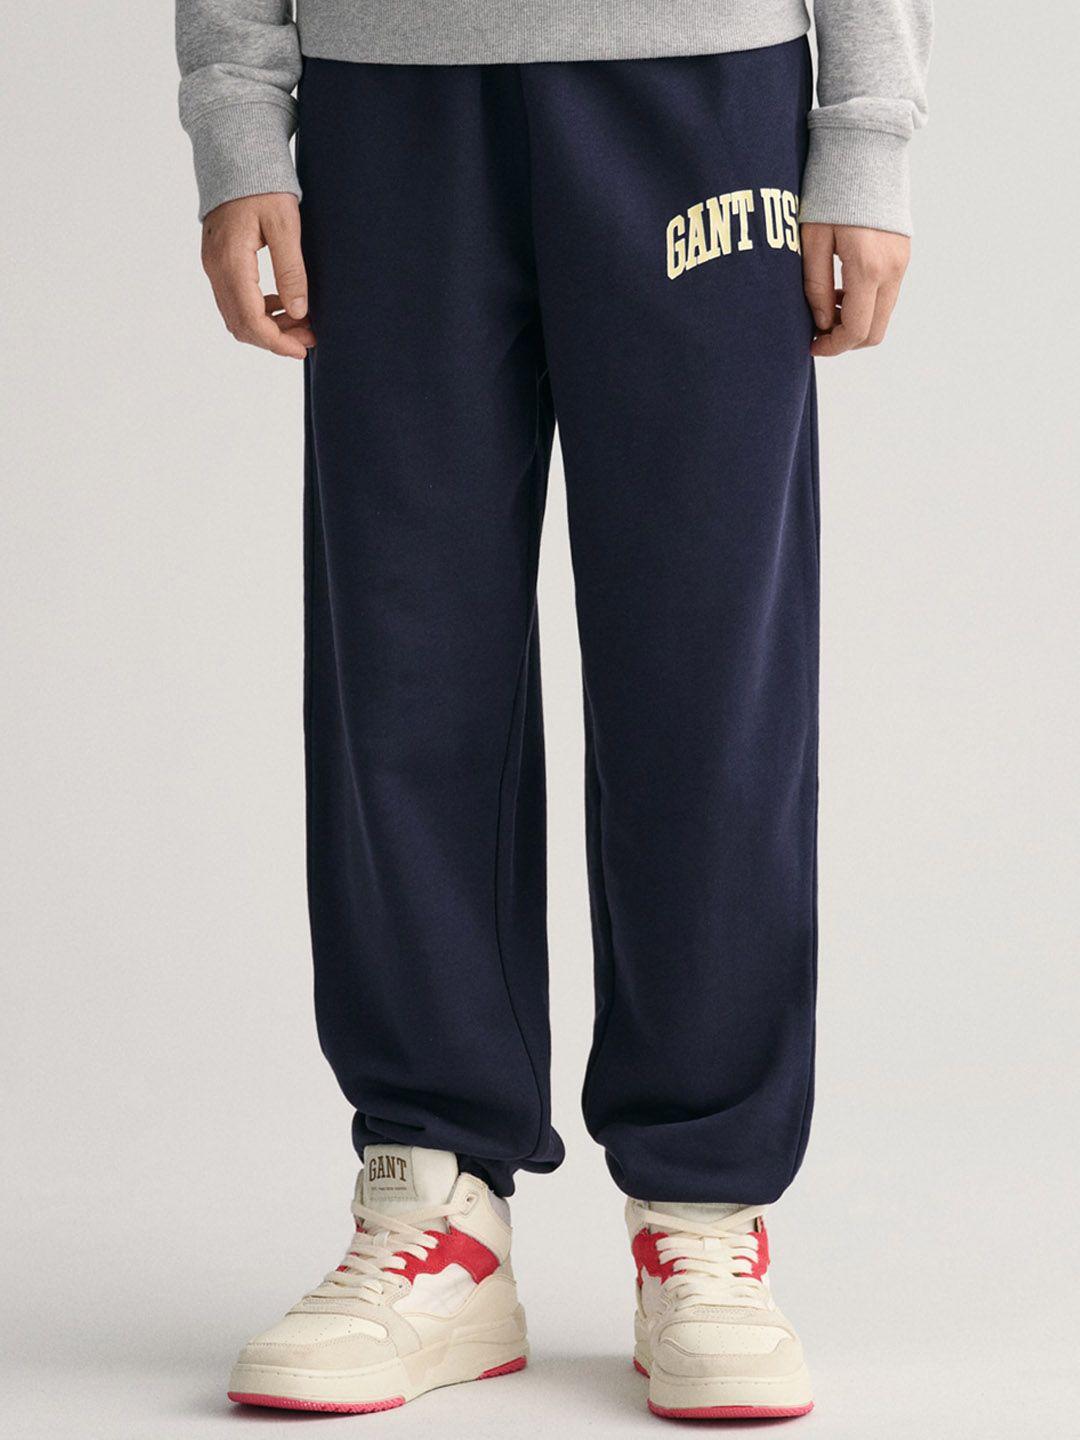 gant kids unisex relaxed fit brand logo cotton joggers track pants